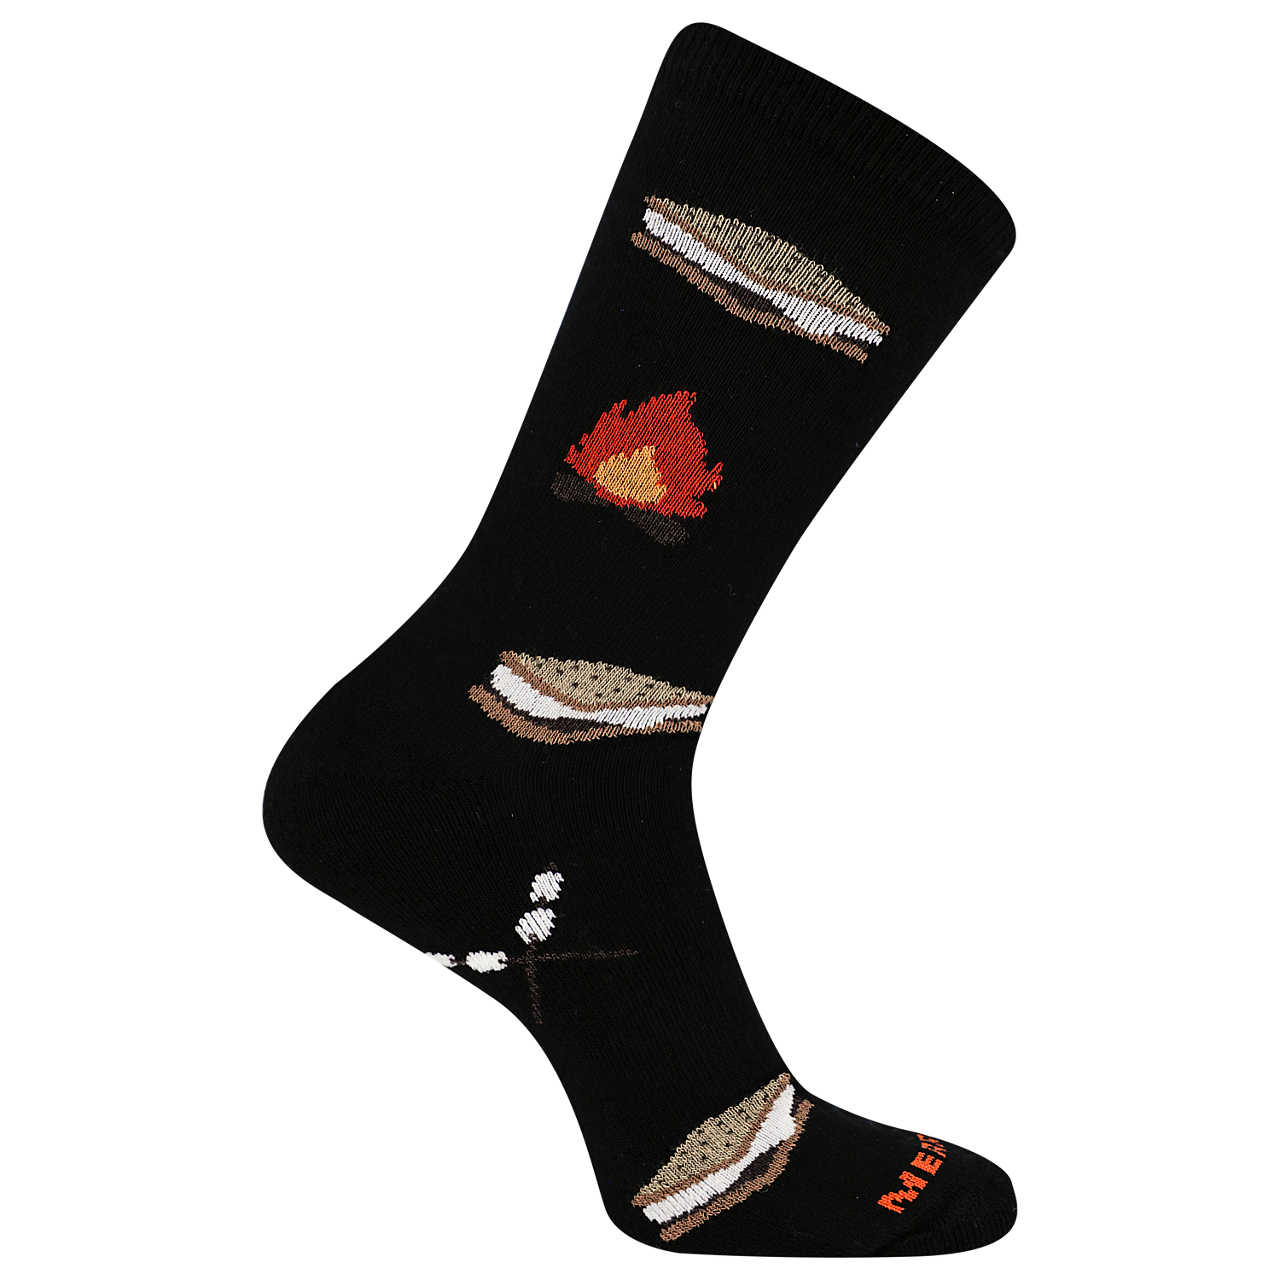 Offers - 50% Off Select Socks With Purchase of Mocs | Merrell